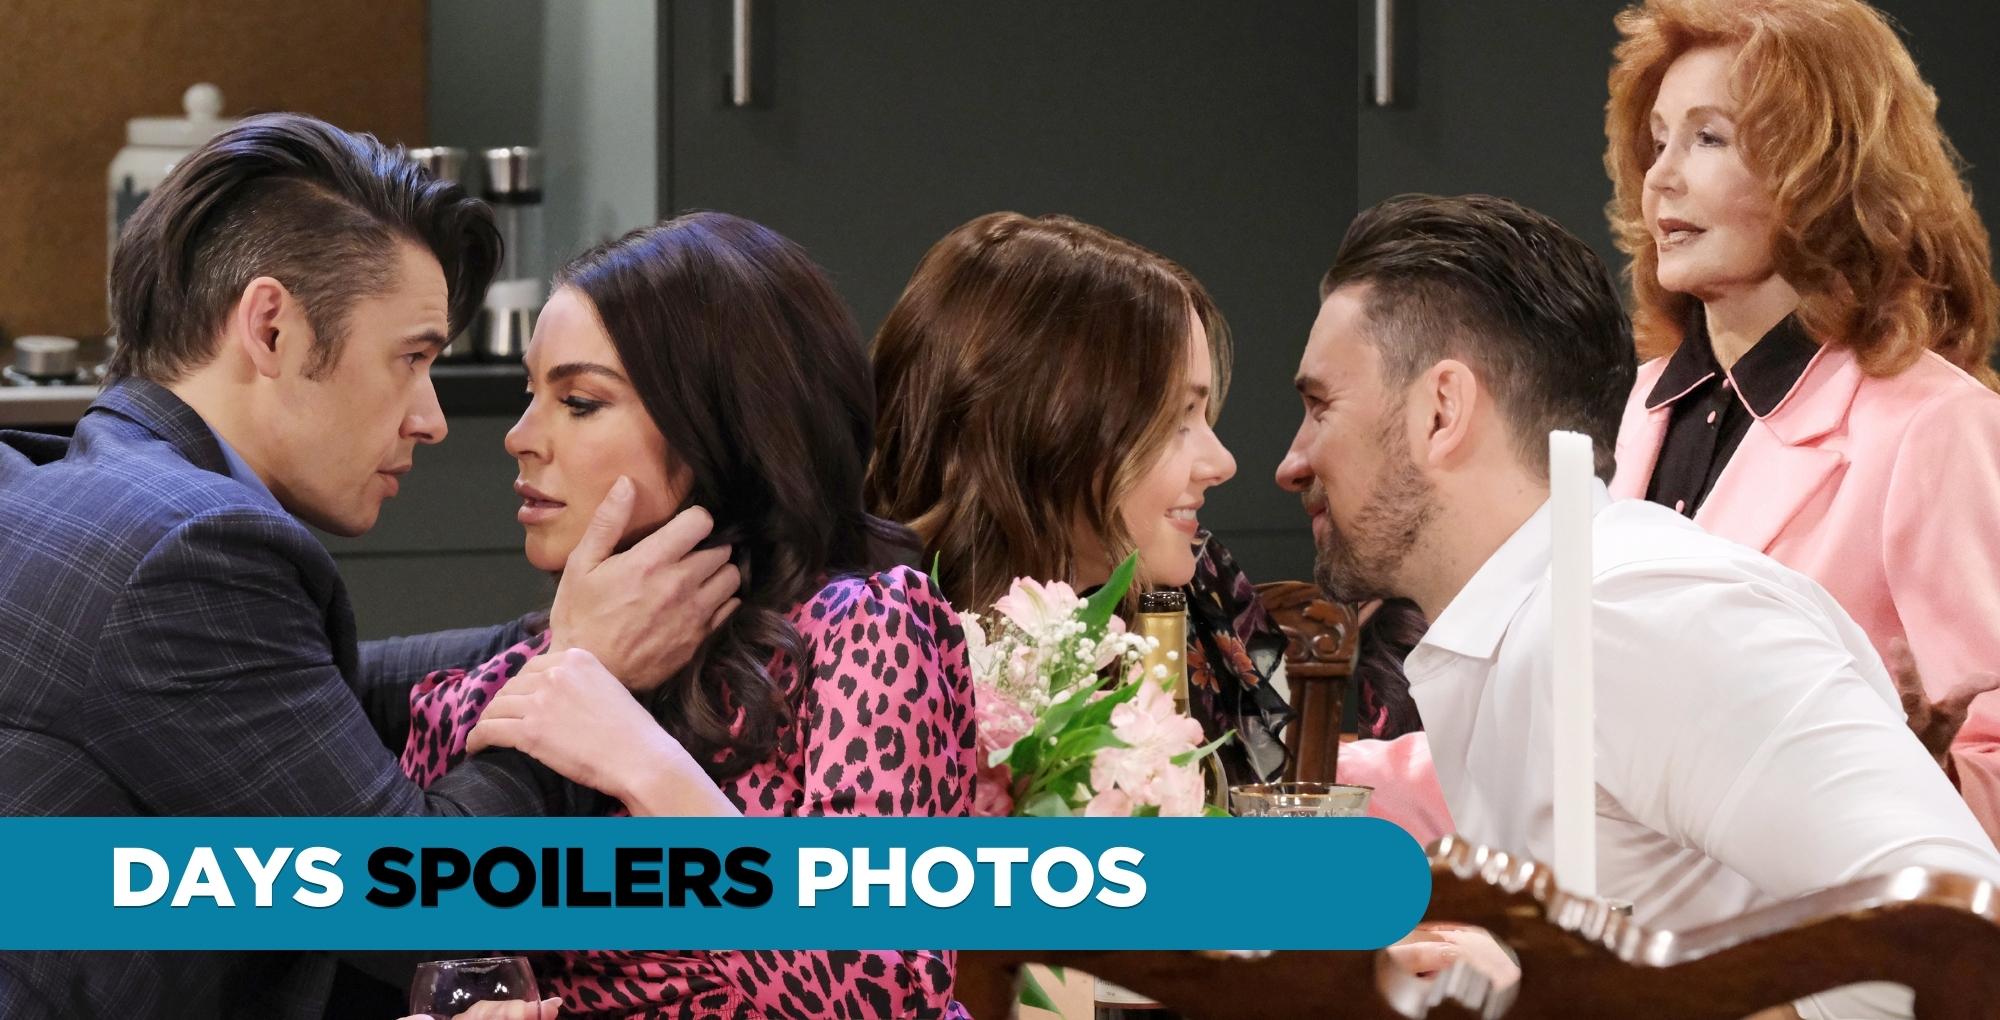 days spoilers photos collage.